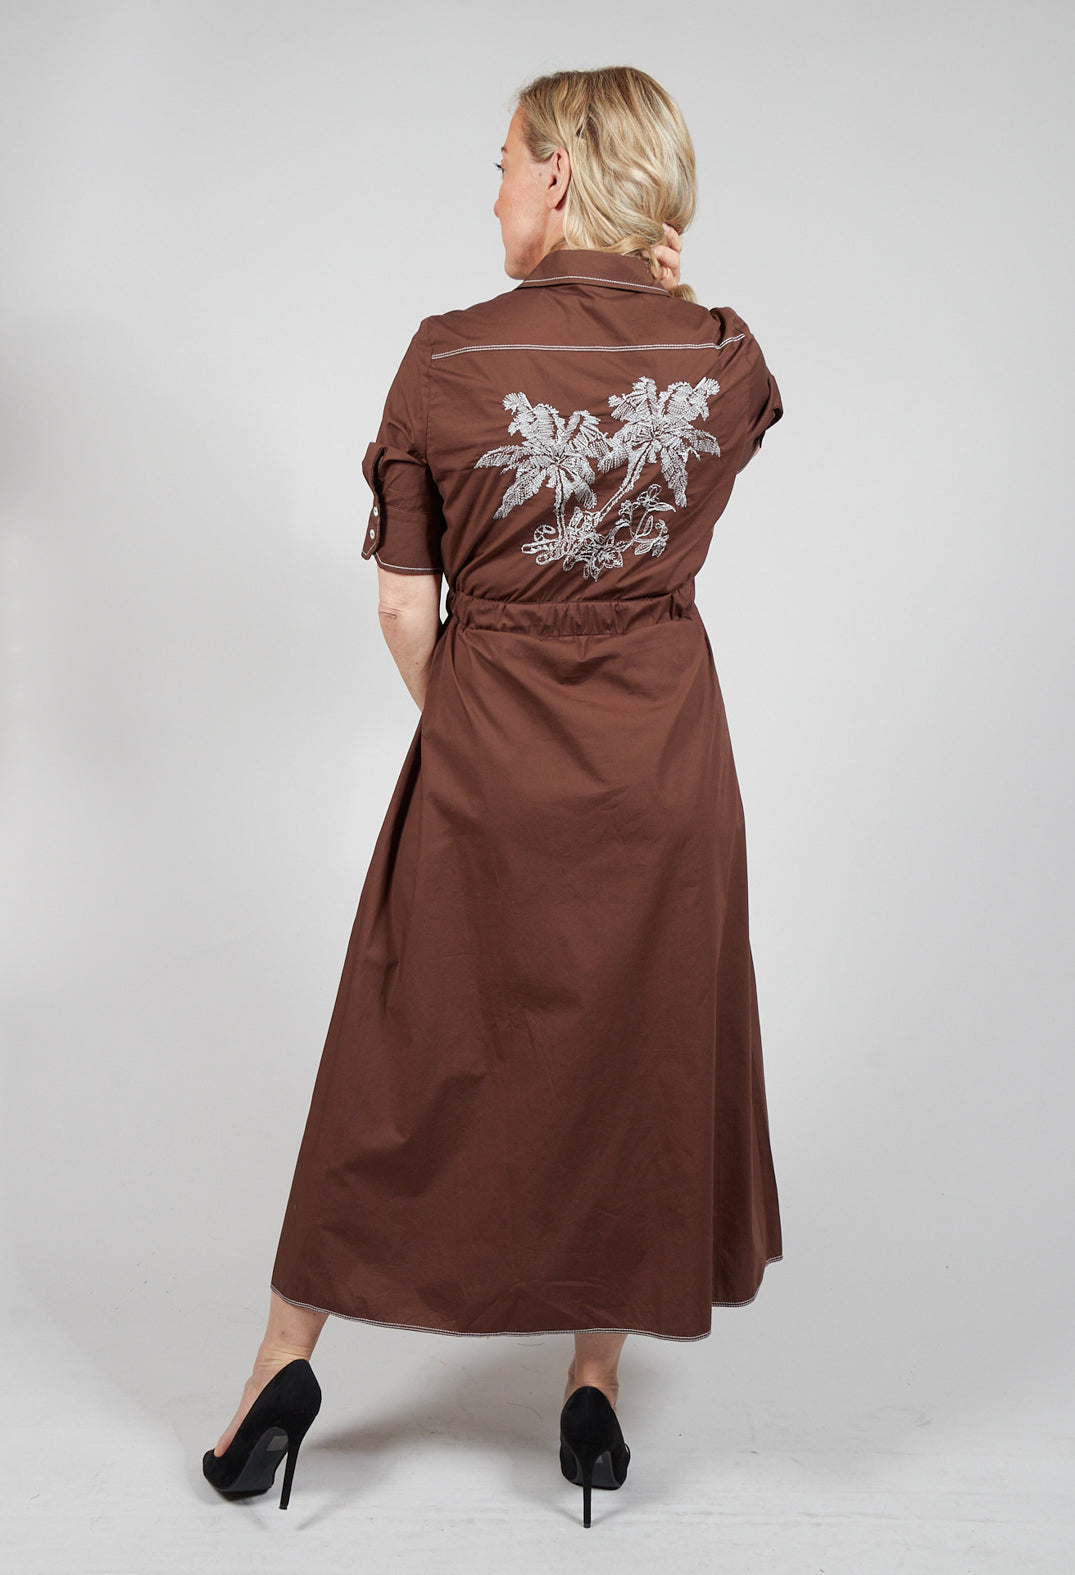 lady wearing brown shirt dress with embroidery detail